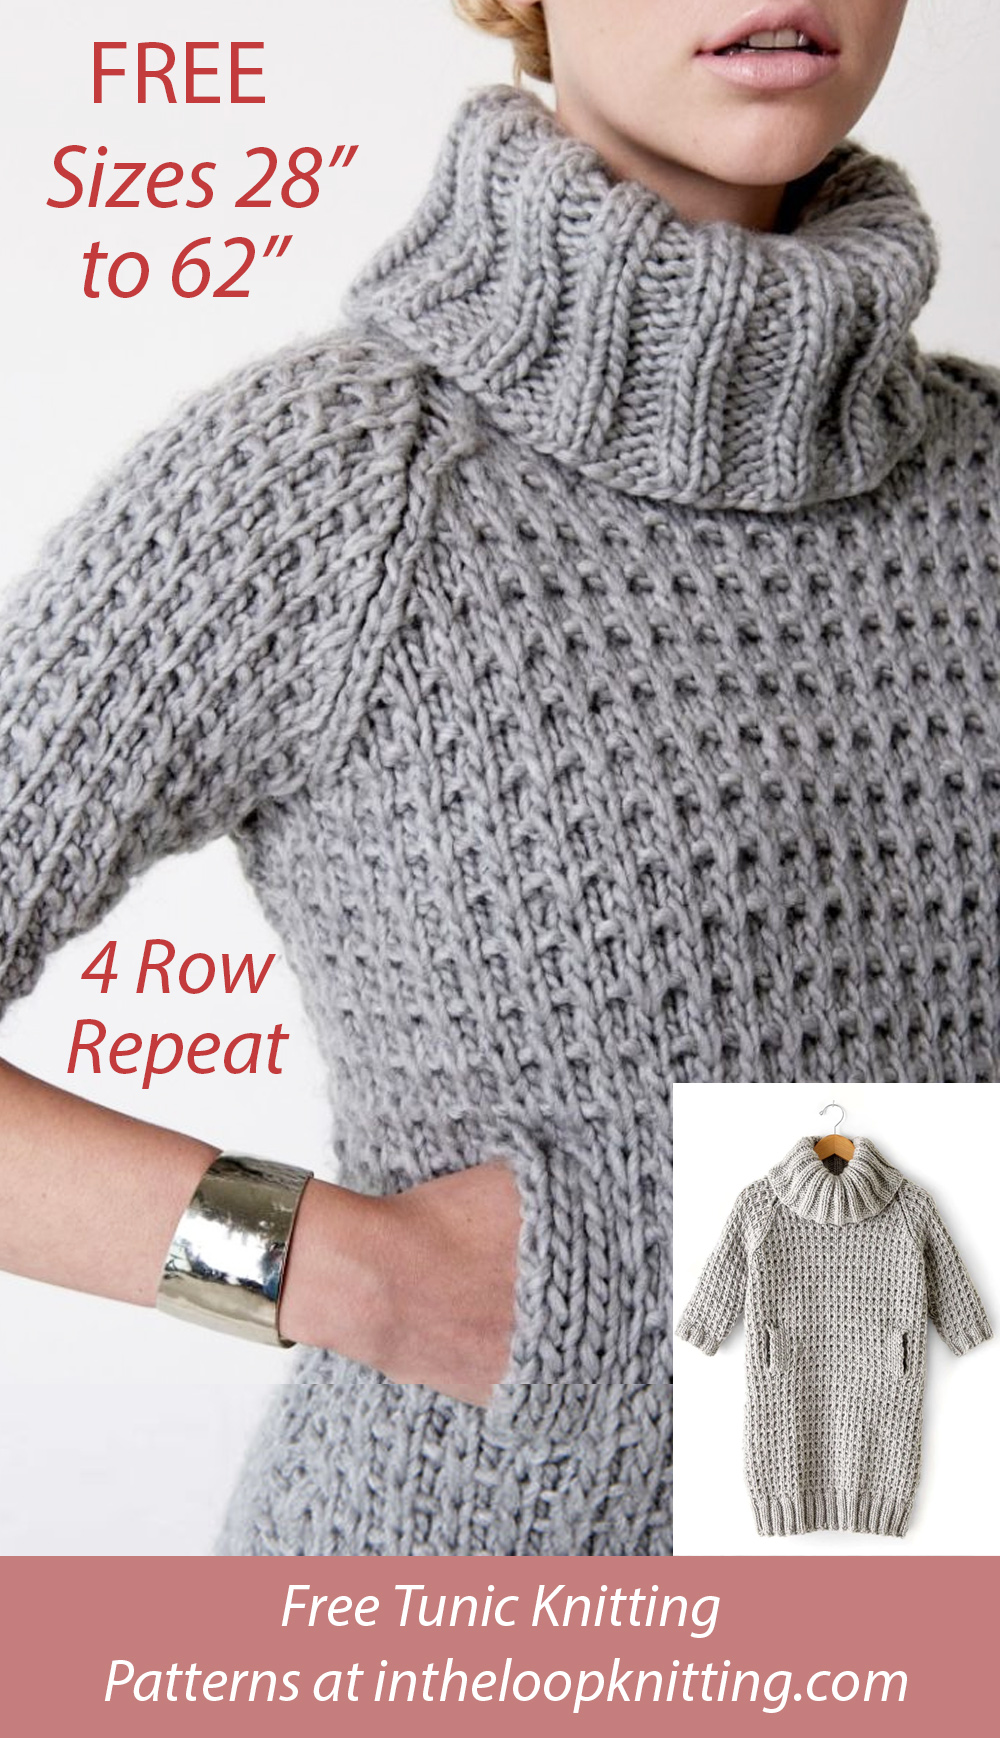 Free Knitting Pattern for 4 Row Repeat Slouchy Sweater Dress